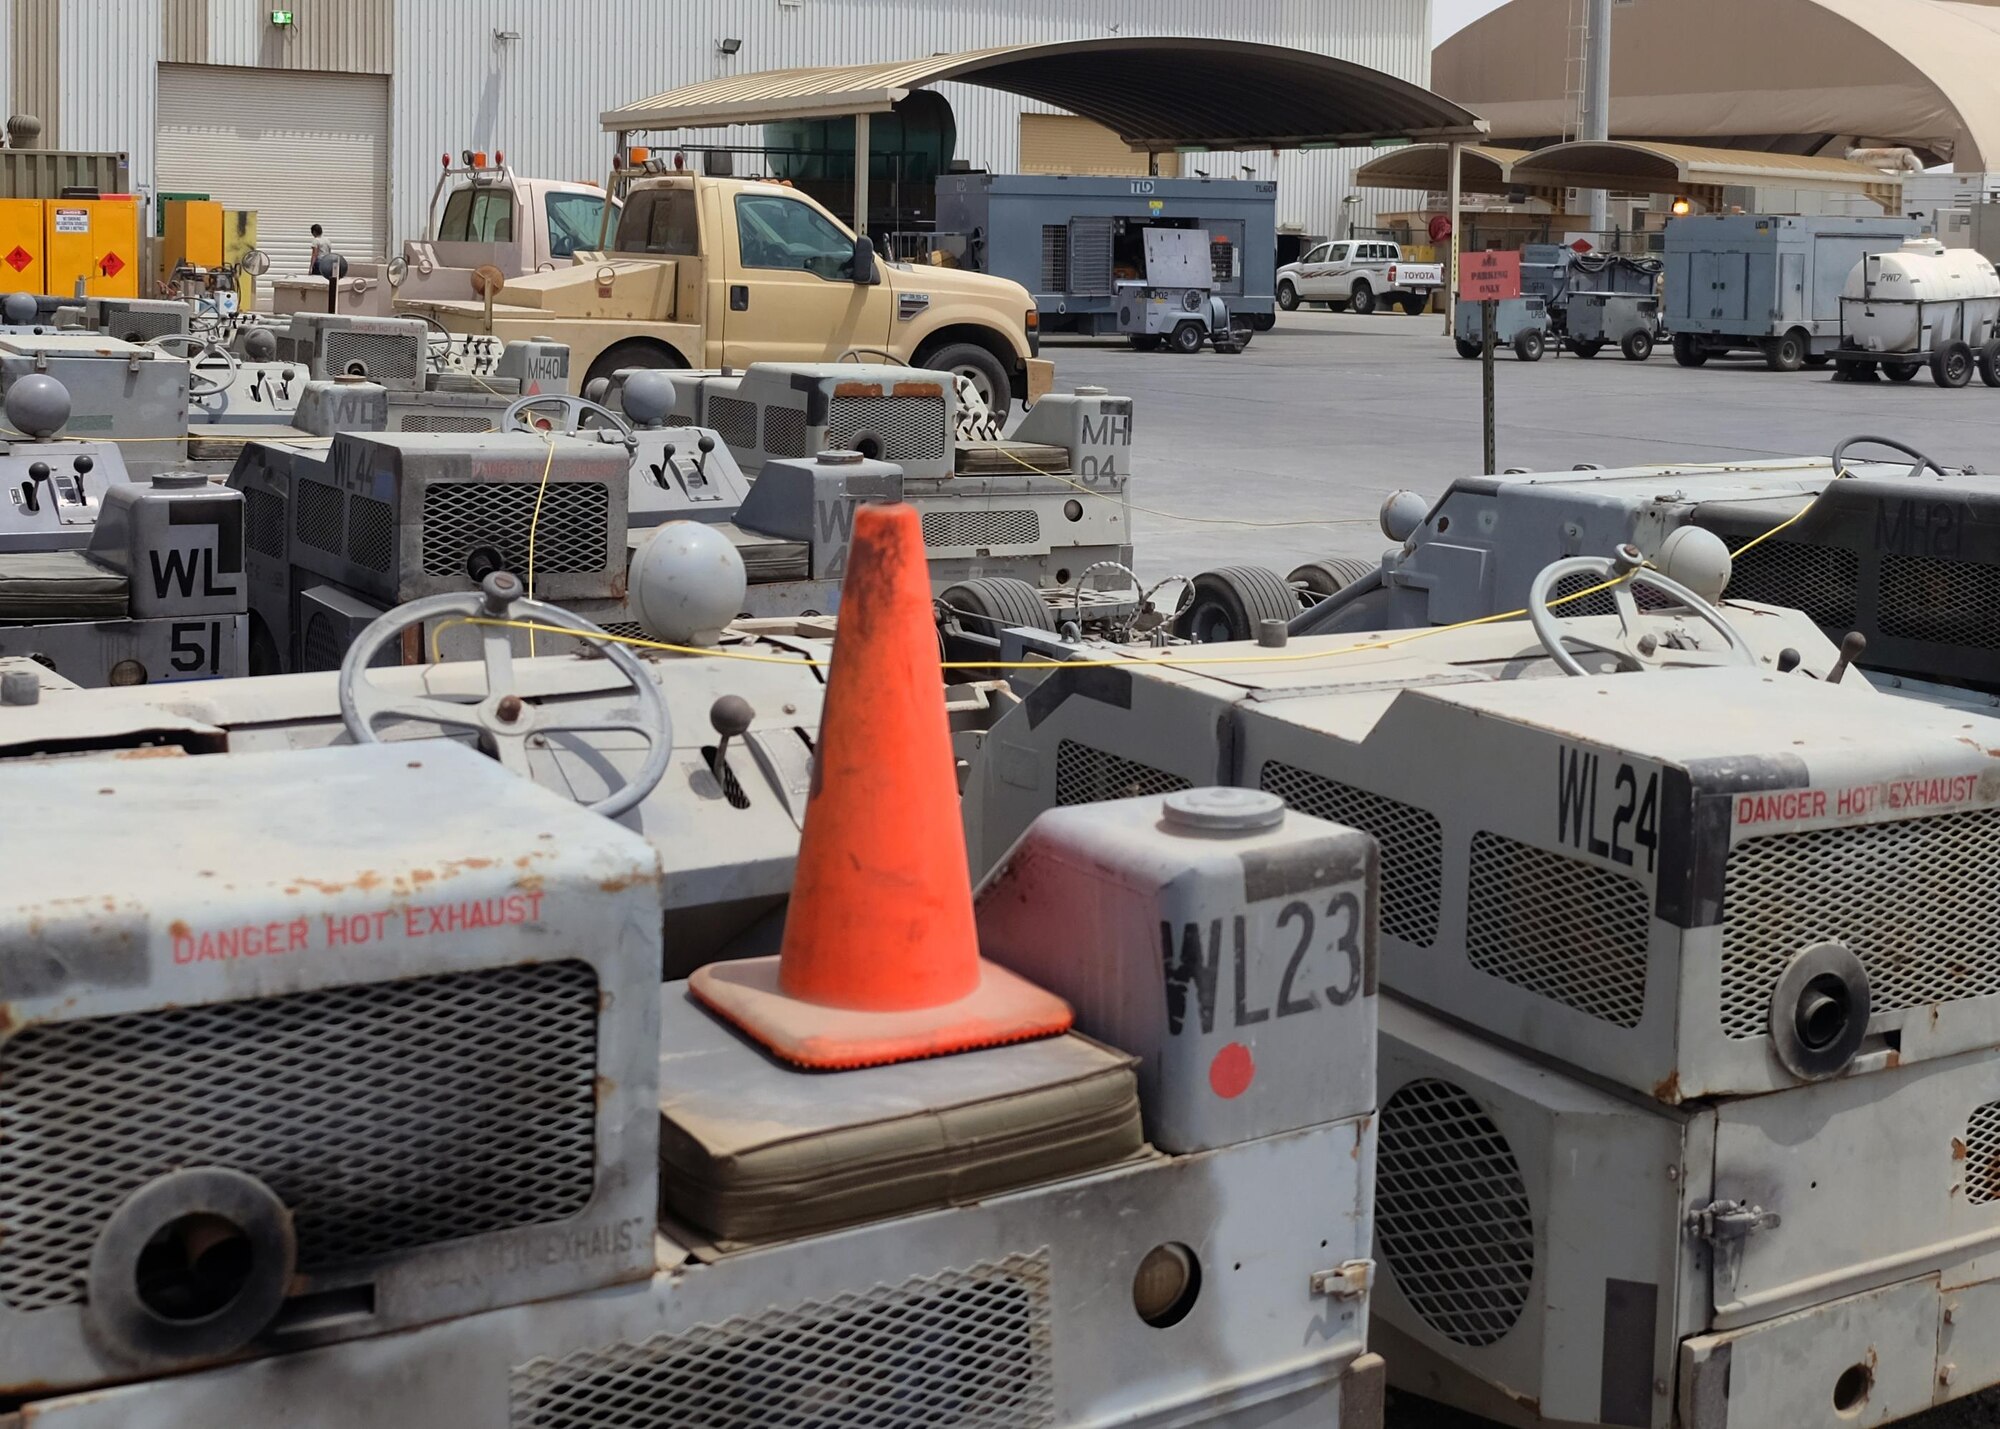 A fleet of aerospace ground equipment stands ready July 12, 2017, at an undisclosed location in southwest Asia. The 45-person Aerospace Ground Equipment flight maintains and repairs nearly 500 pieces of aerospace ground equipment to meet the demands of the airpower mission. (U.S. Air Force photo by Senior Airman Preston Webb)